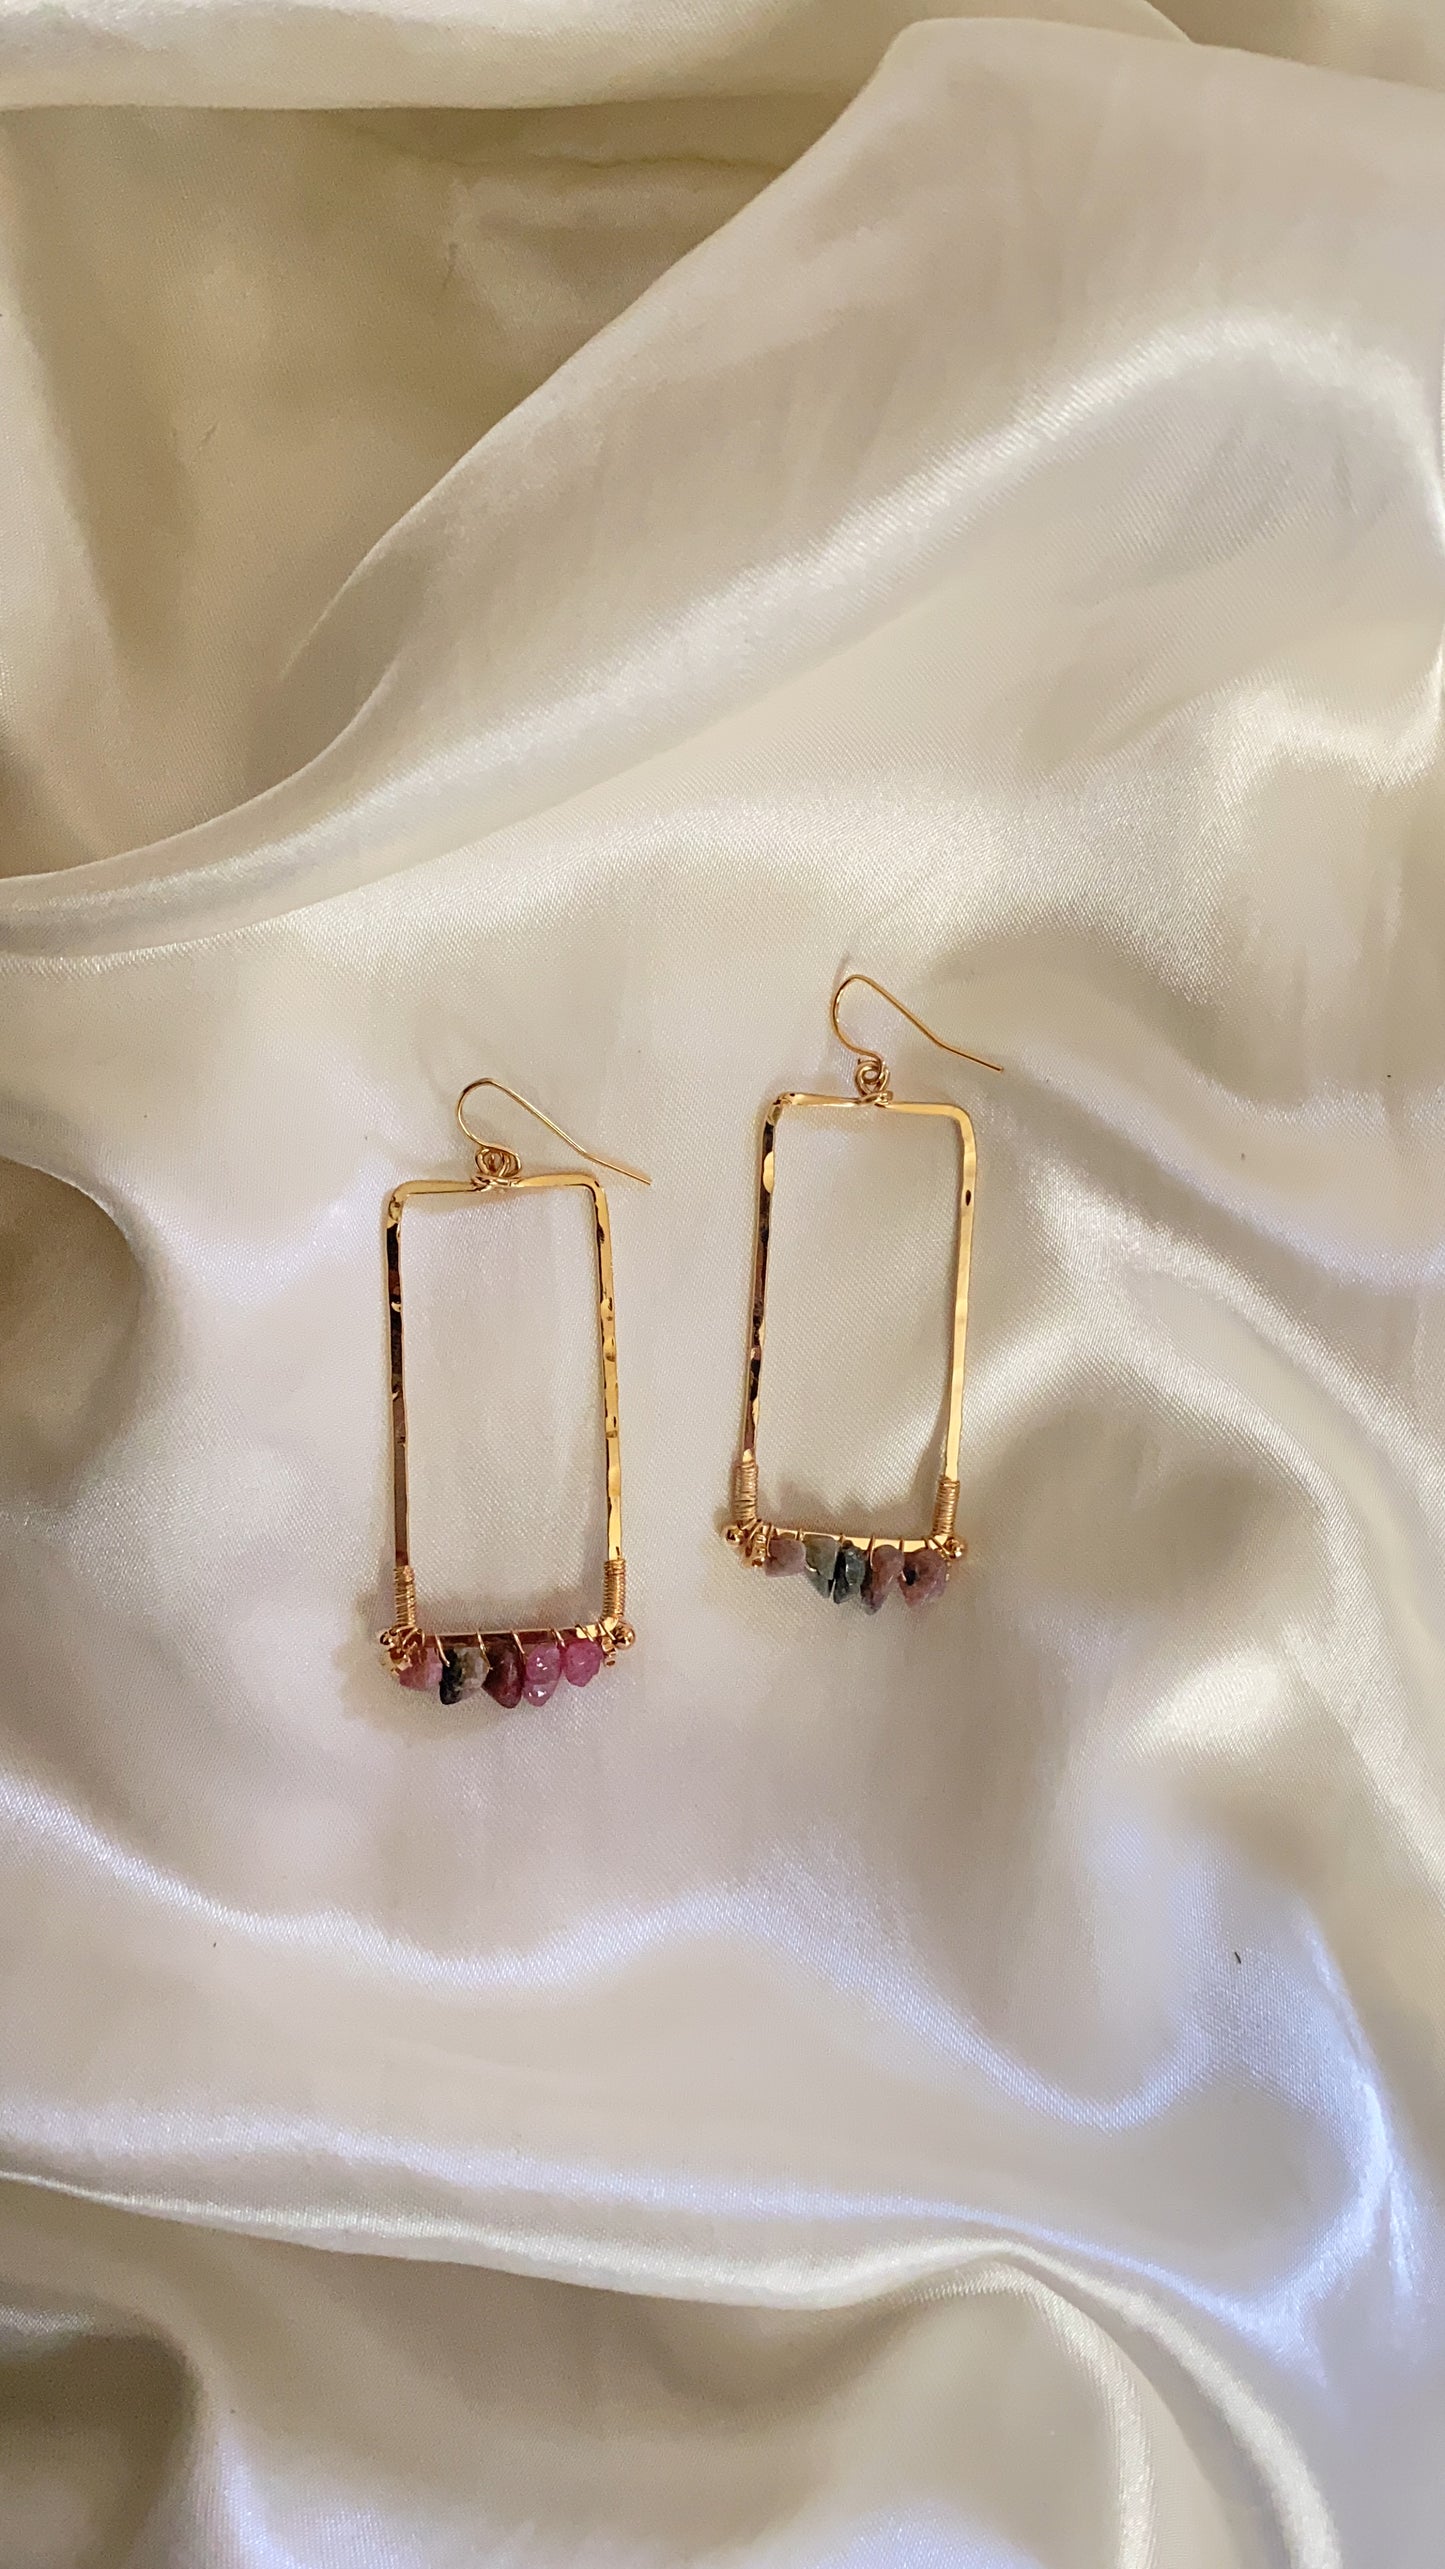 Handmade Hammered Gold Plated Rectangular Earrings With Stones